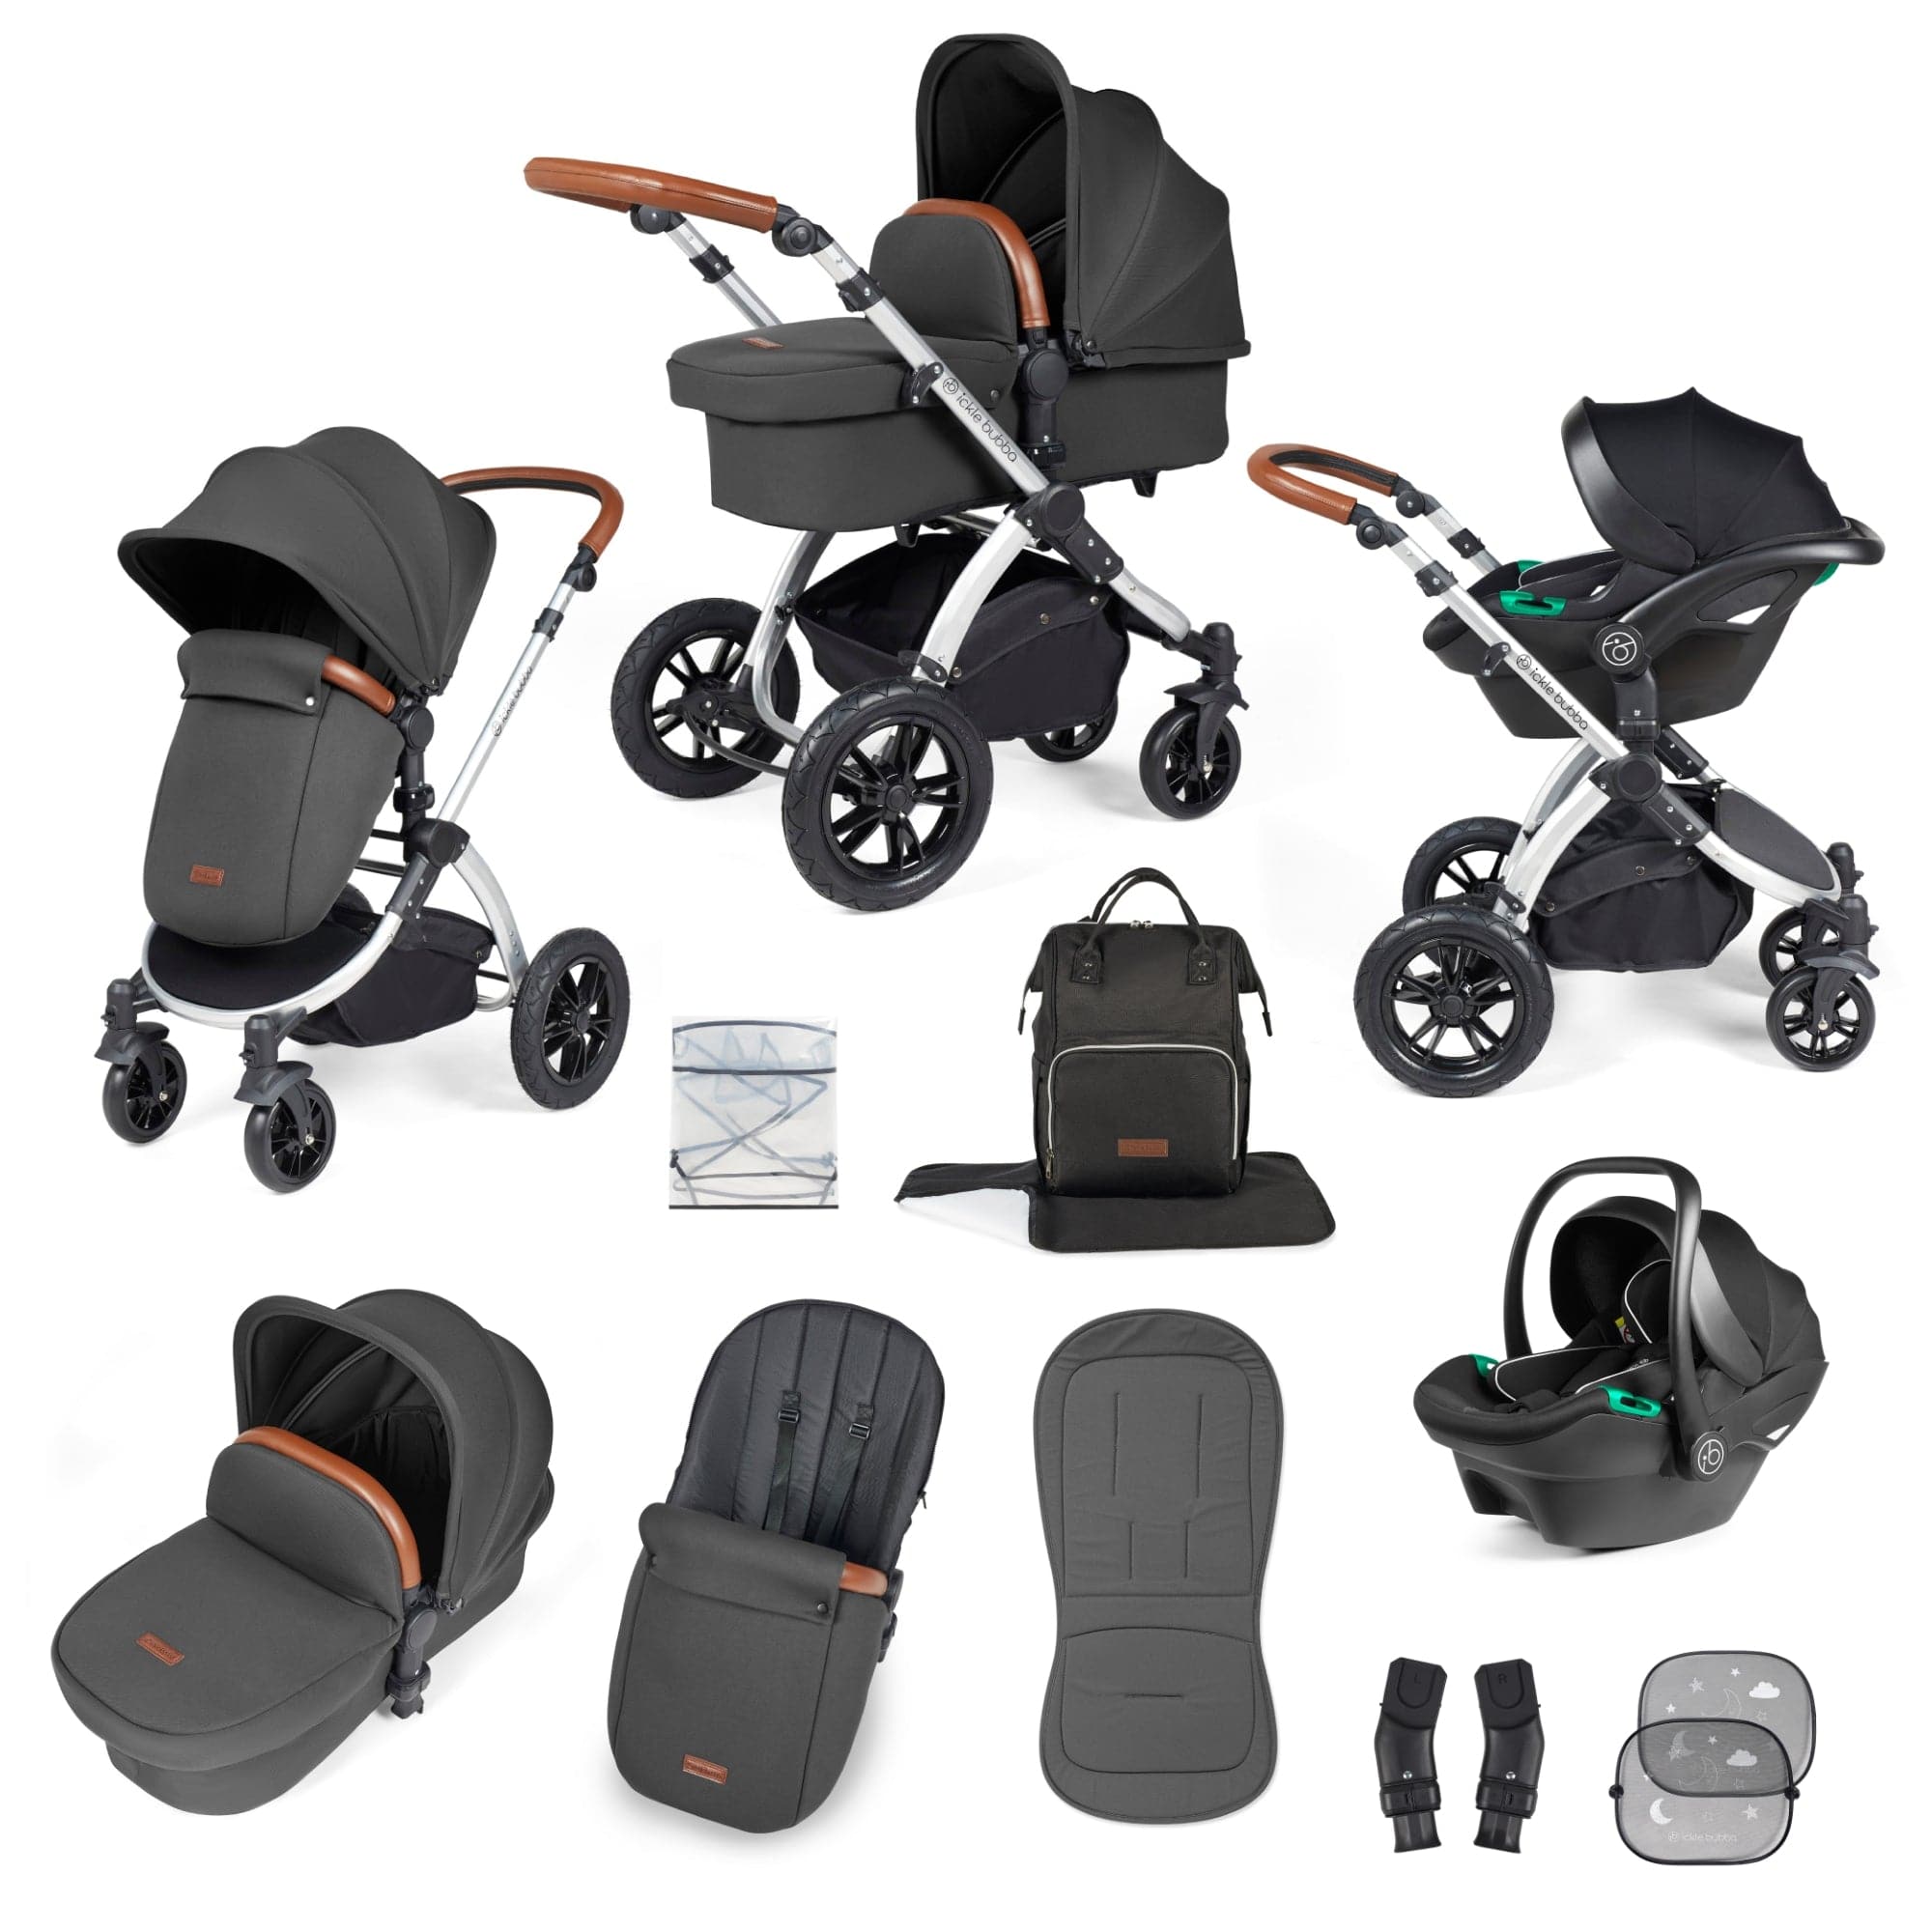 Ickle Bubba Stomp Luxe All-in-One I-Size Travel System With Isofix Base - Silver / Charcoal Grey / Tan   